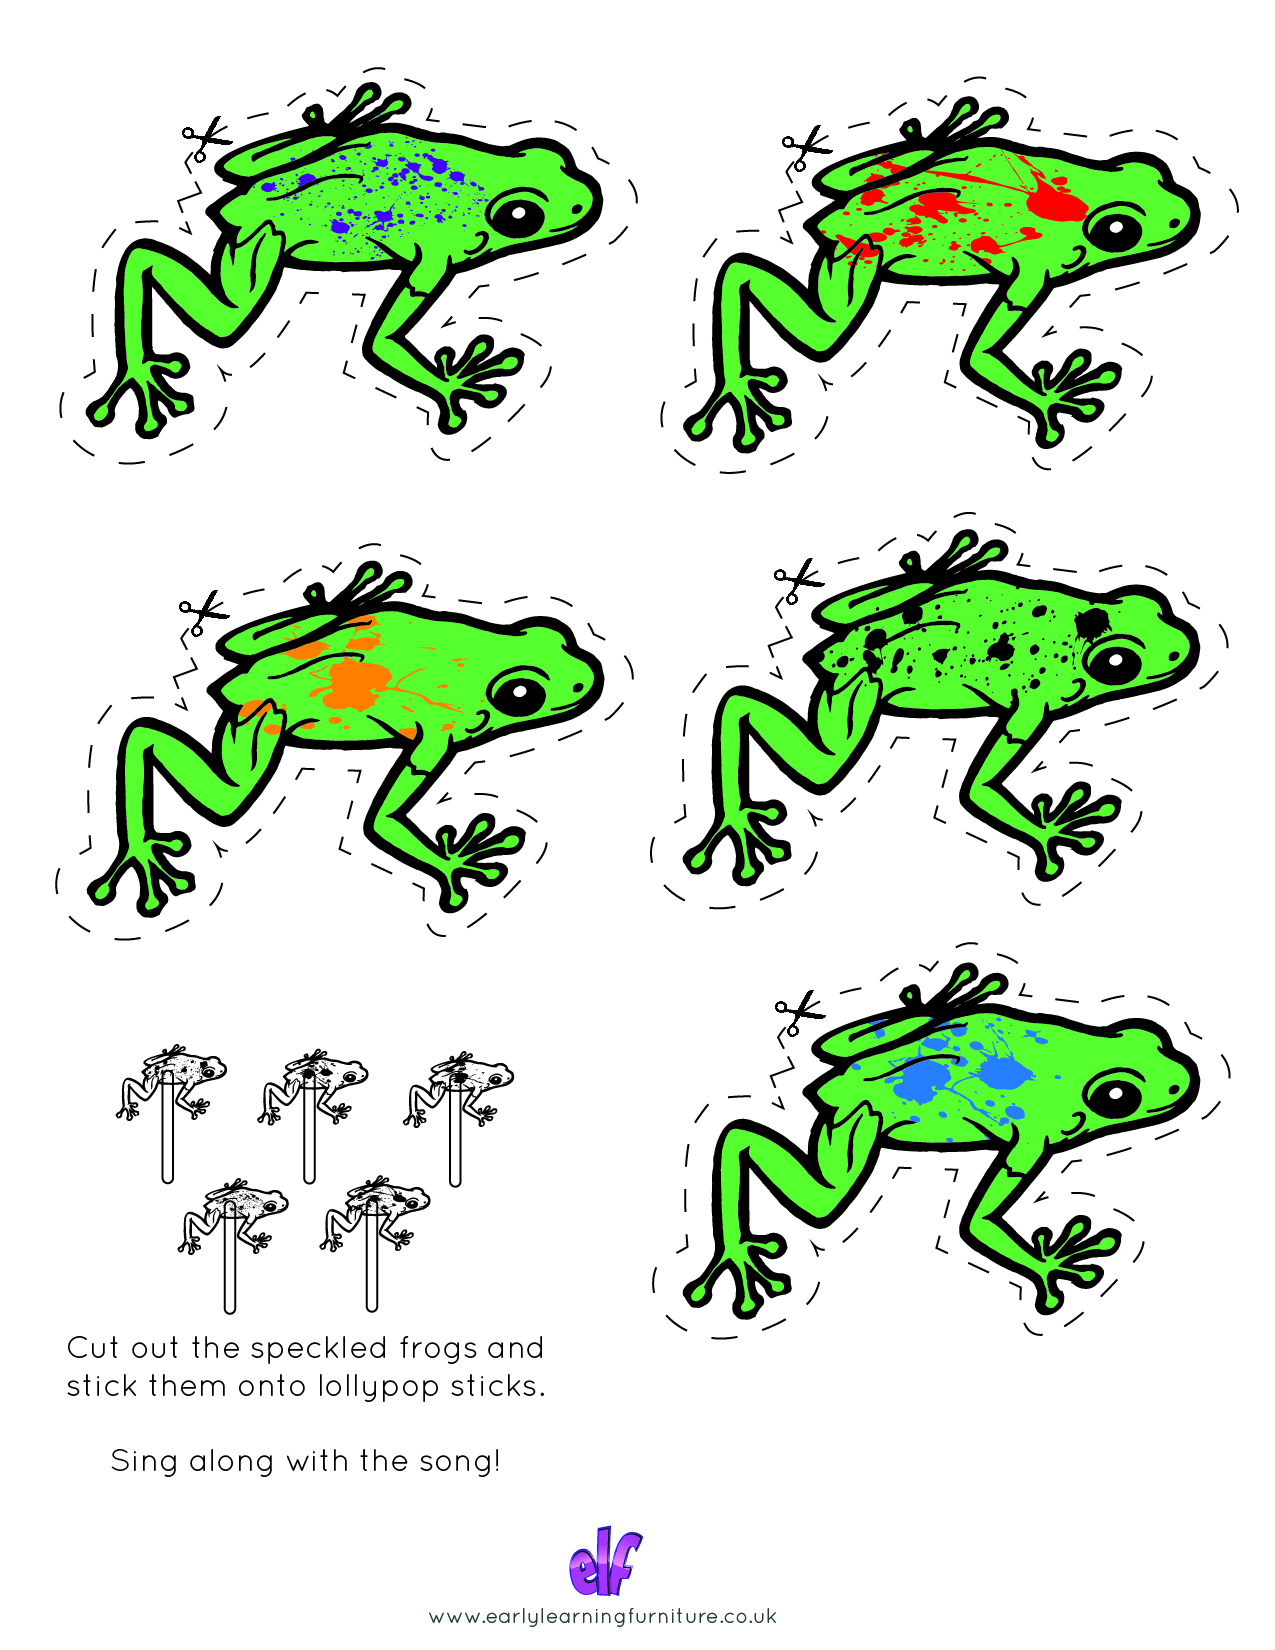 Free Teaching Resources Nursery Rhymes- Five Little Speckled Frogs Cut Out